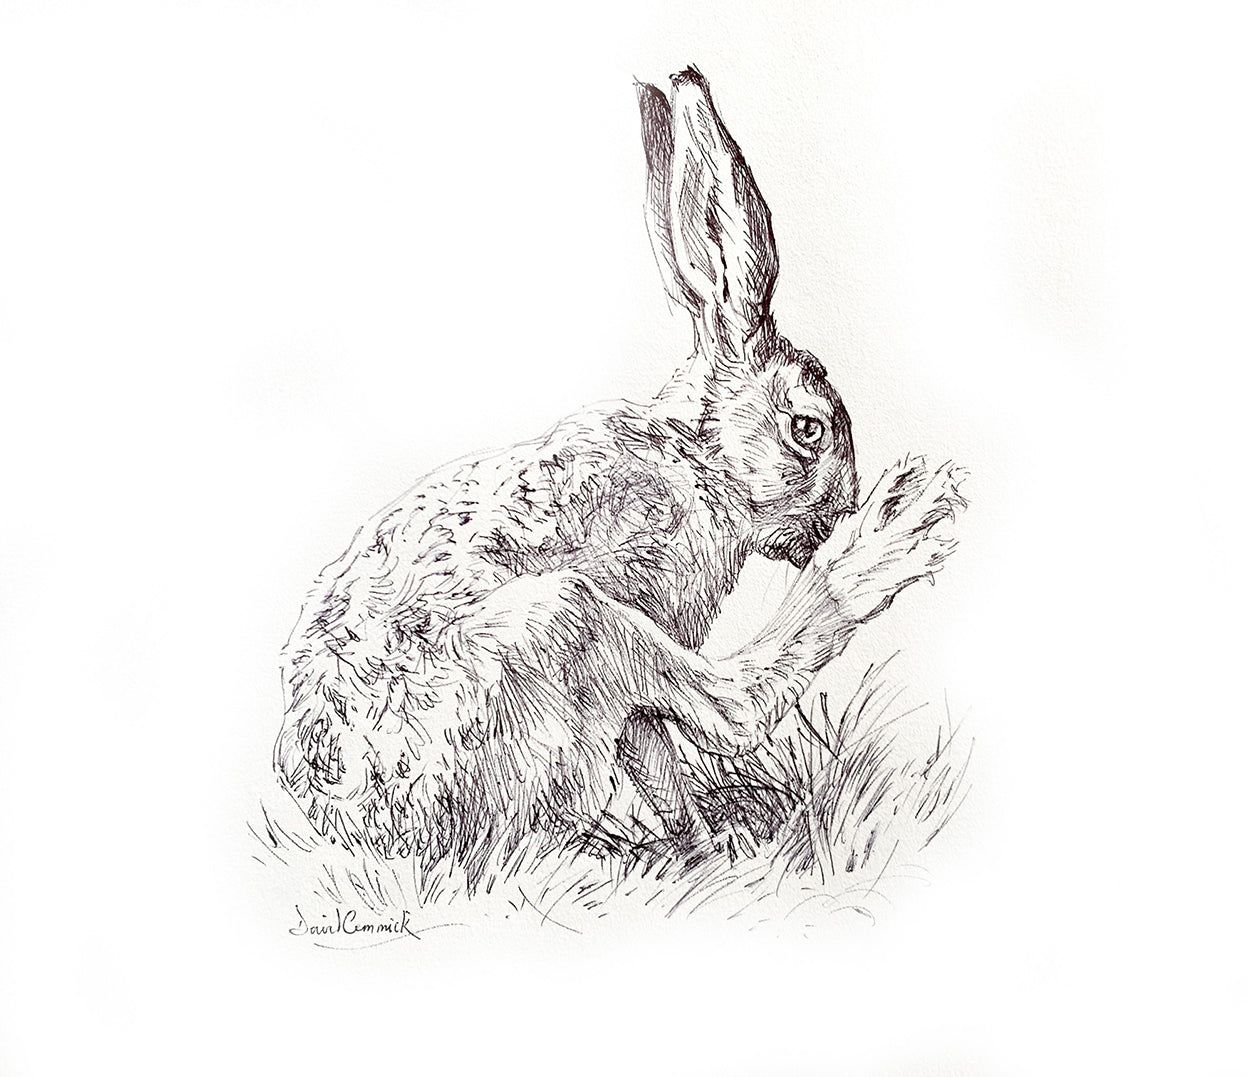 'Hare Washing’ - Original Ink Drawing by David Cemmick - 30 x 35cm